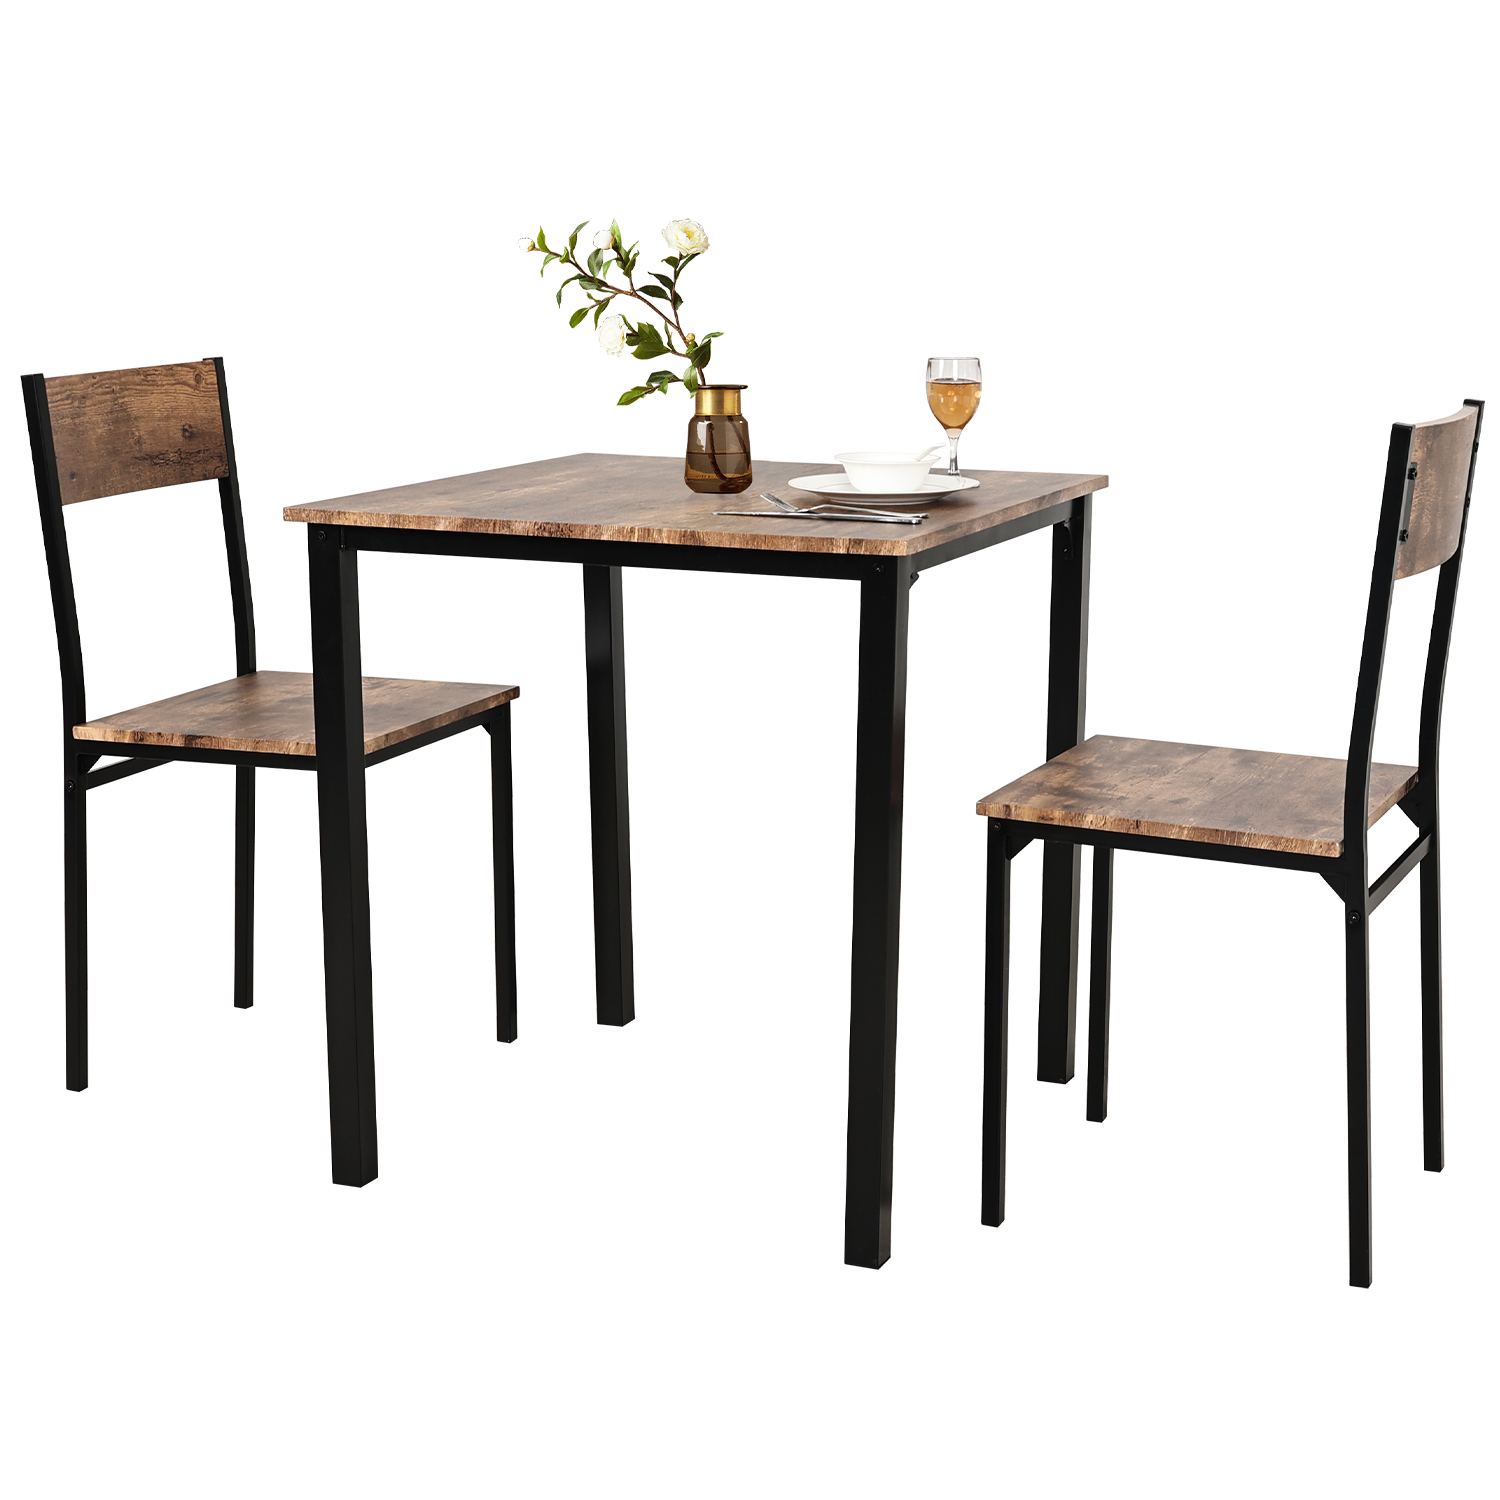 UK-IF701\IF702 Dining Table and Chairs Set Steel Industrial Style Frame Retro Wooden for Home Kitchen Dining Room